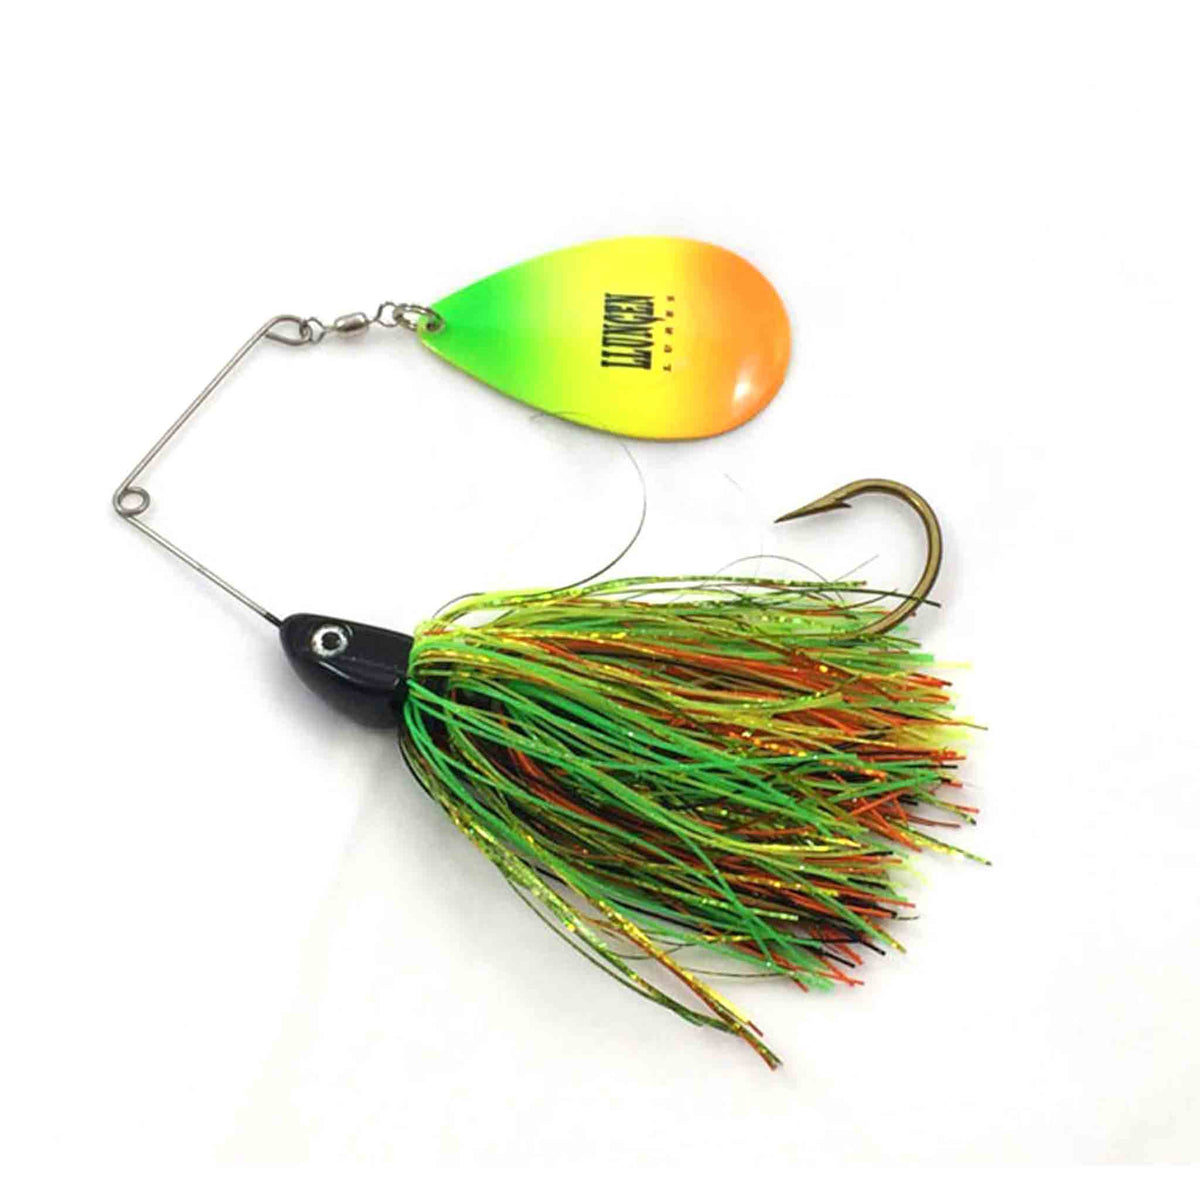 Llungen Lures Magnum Nutbuster hybrid Fire Tiger Spinnerbaits